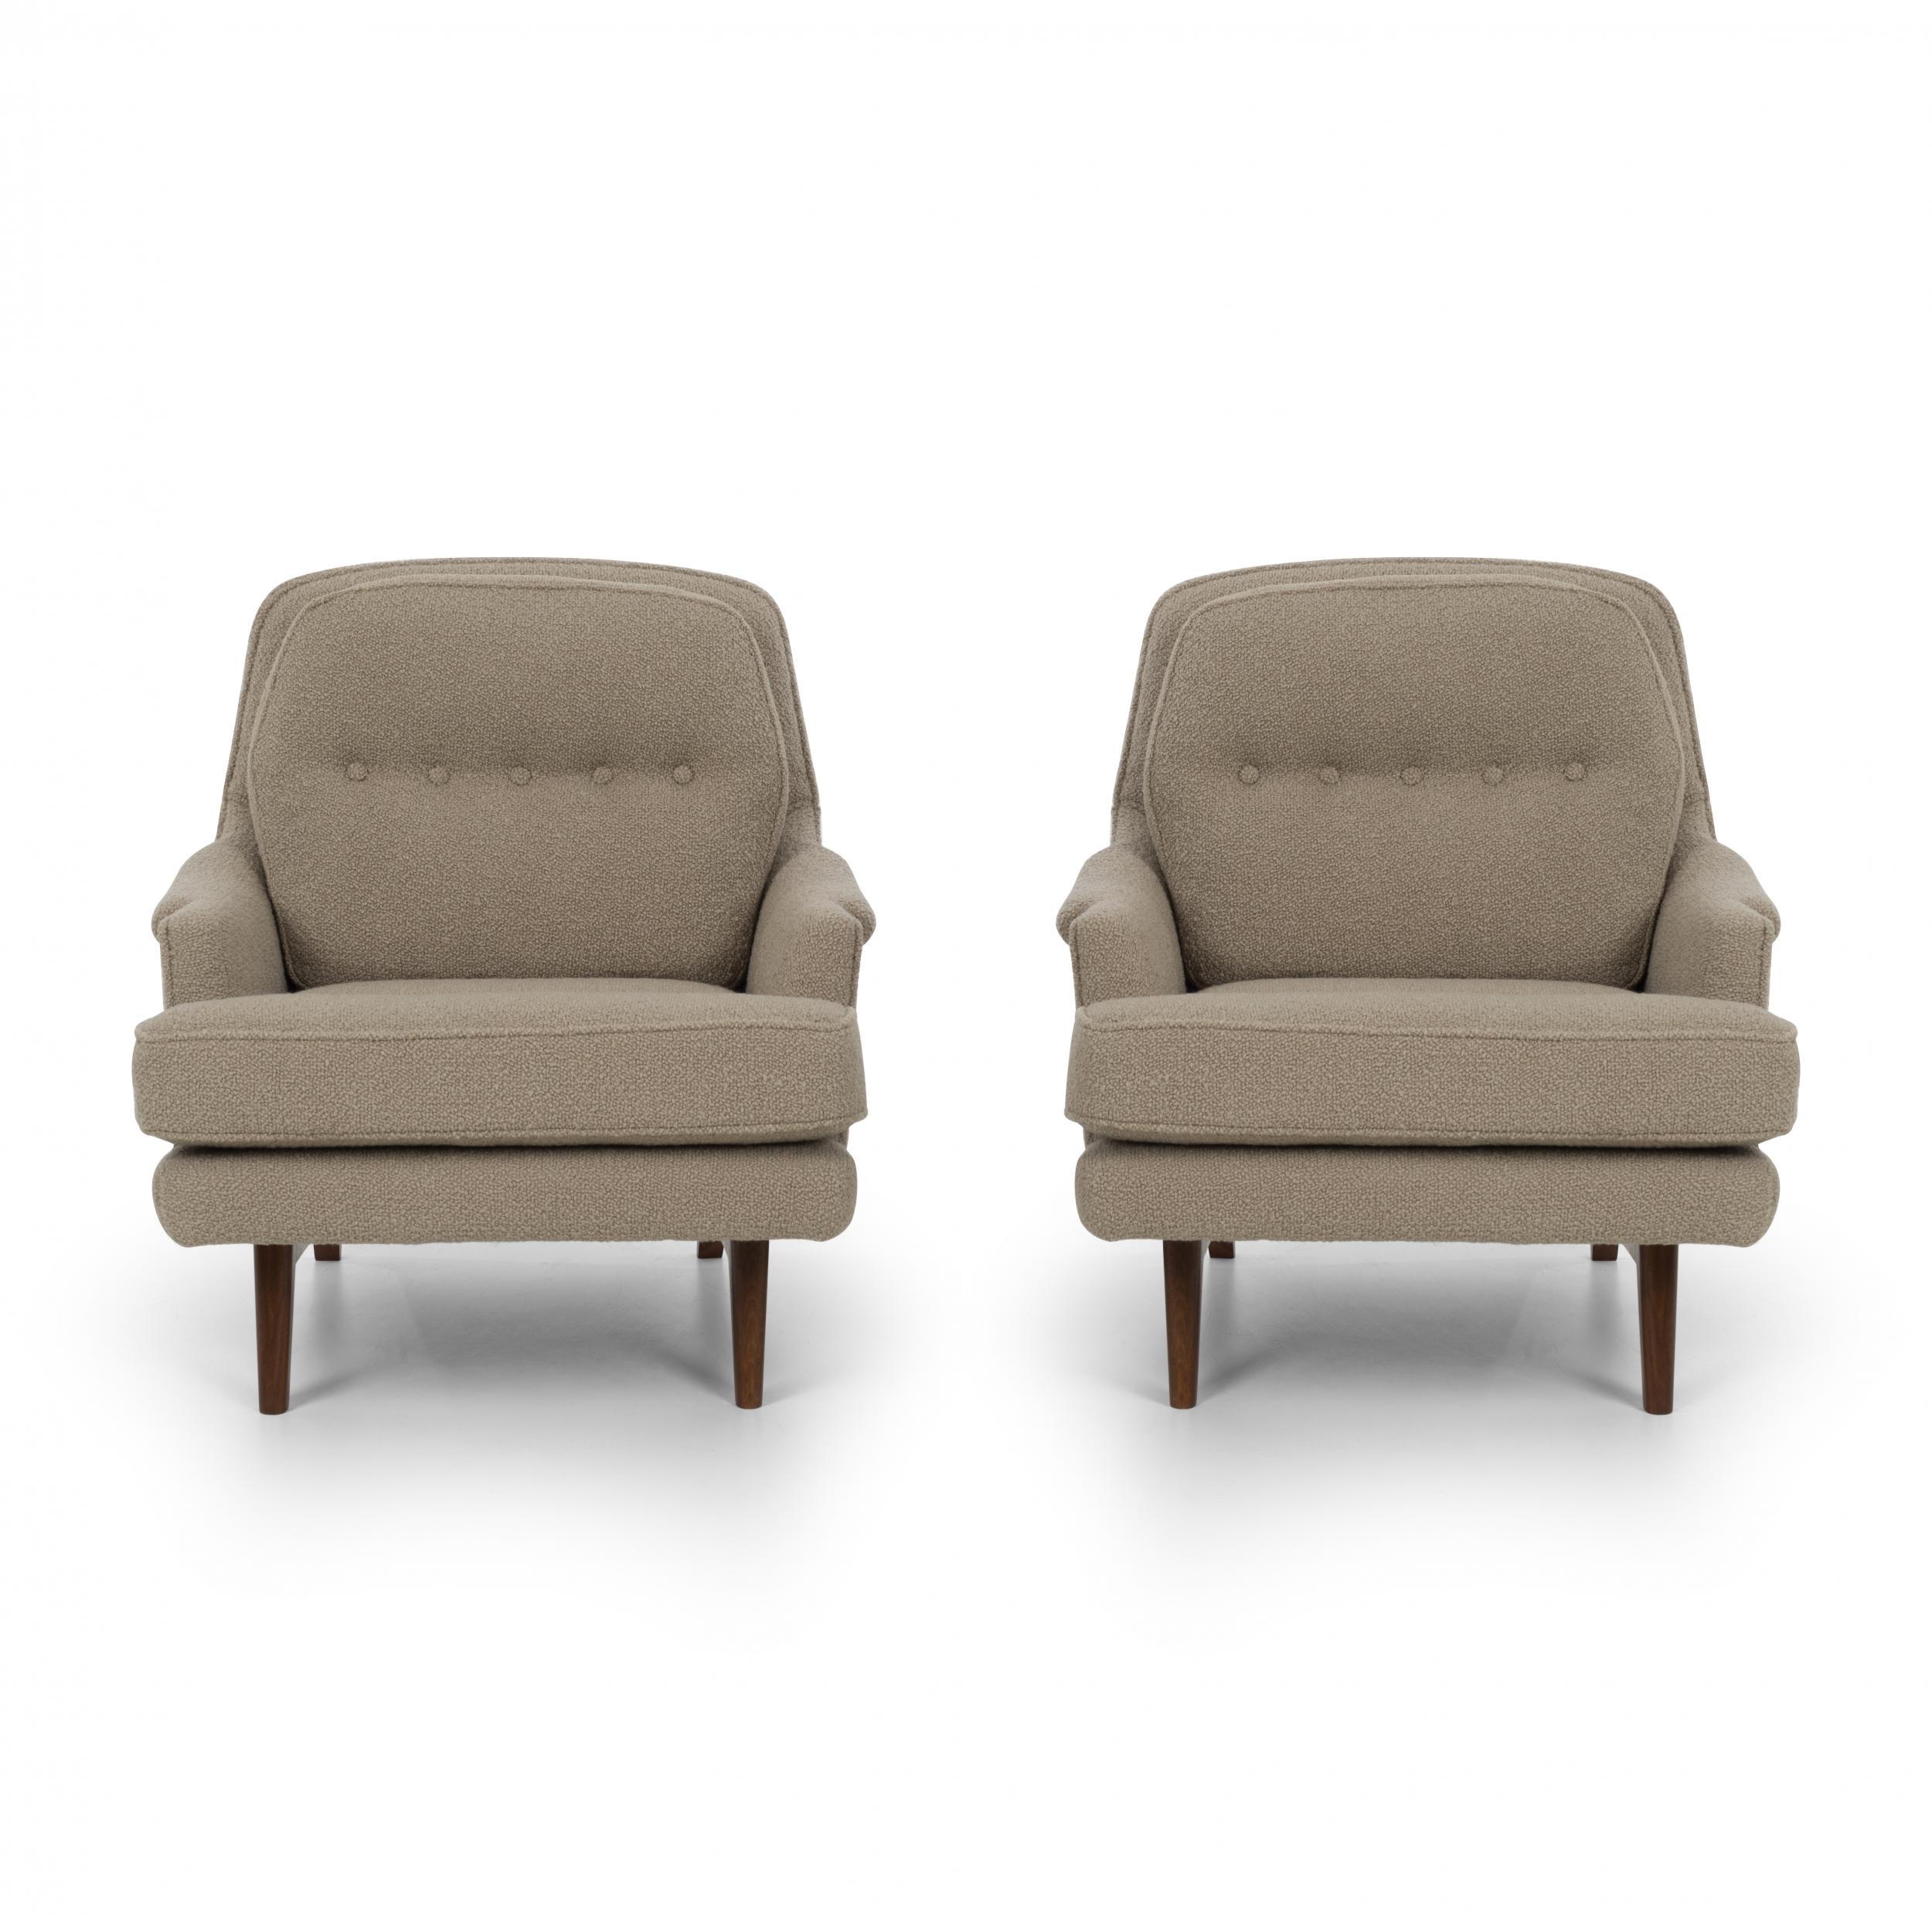 Mid-20th Century Edward Wormley for Dunbar Pair of Lounges Chairs in Knoll Boucle For Sale